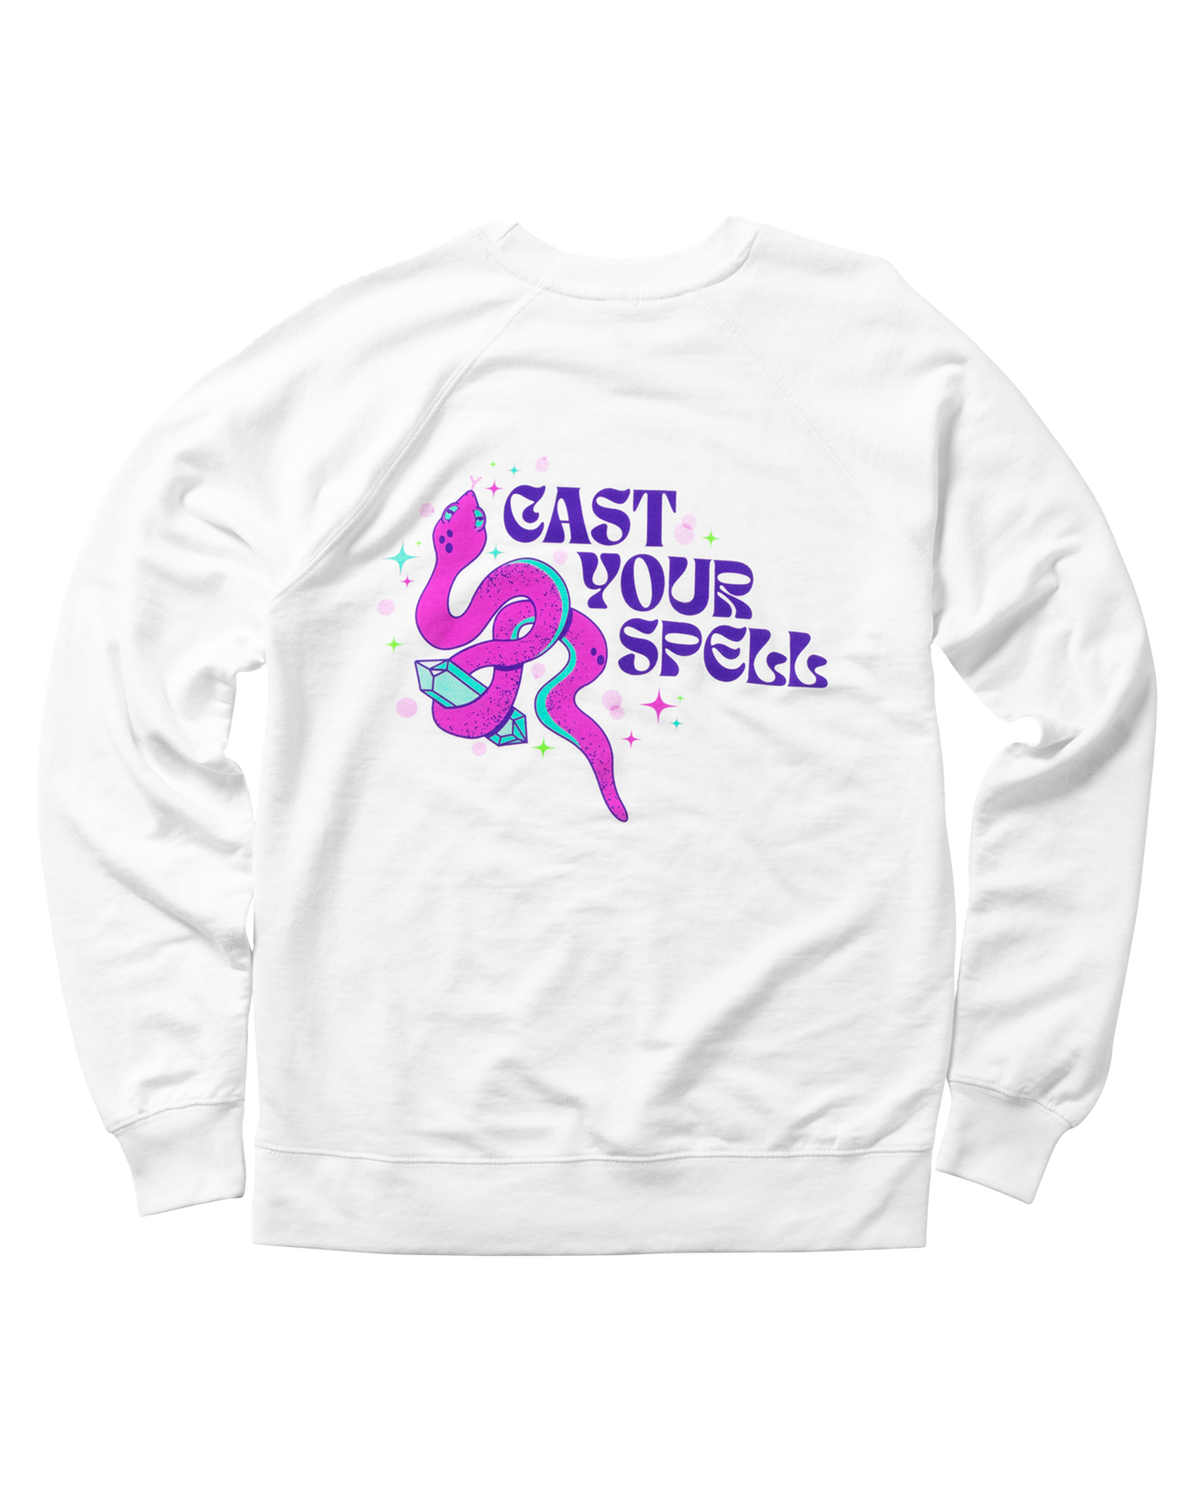 A back view Witch&#39;s Brew crewneck with a purple font stating cast your spell.  